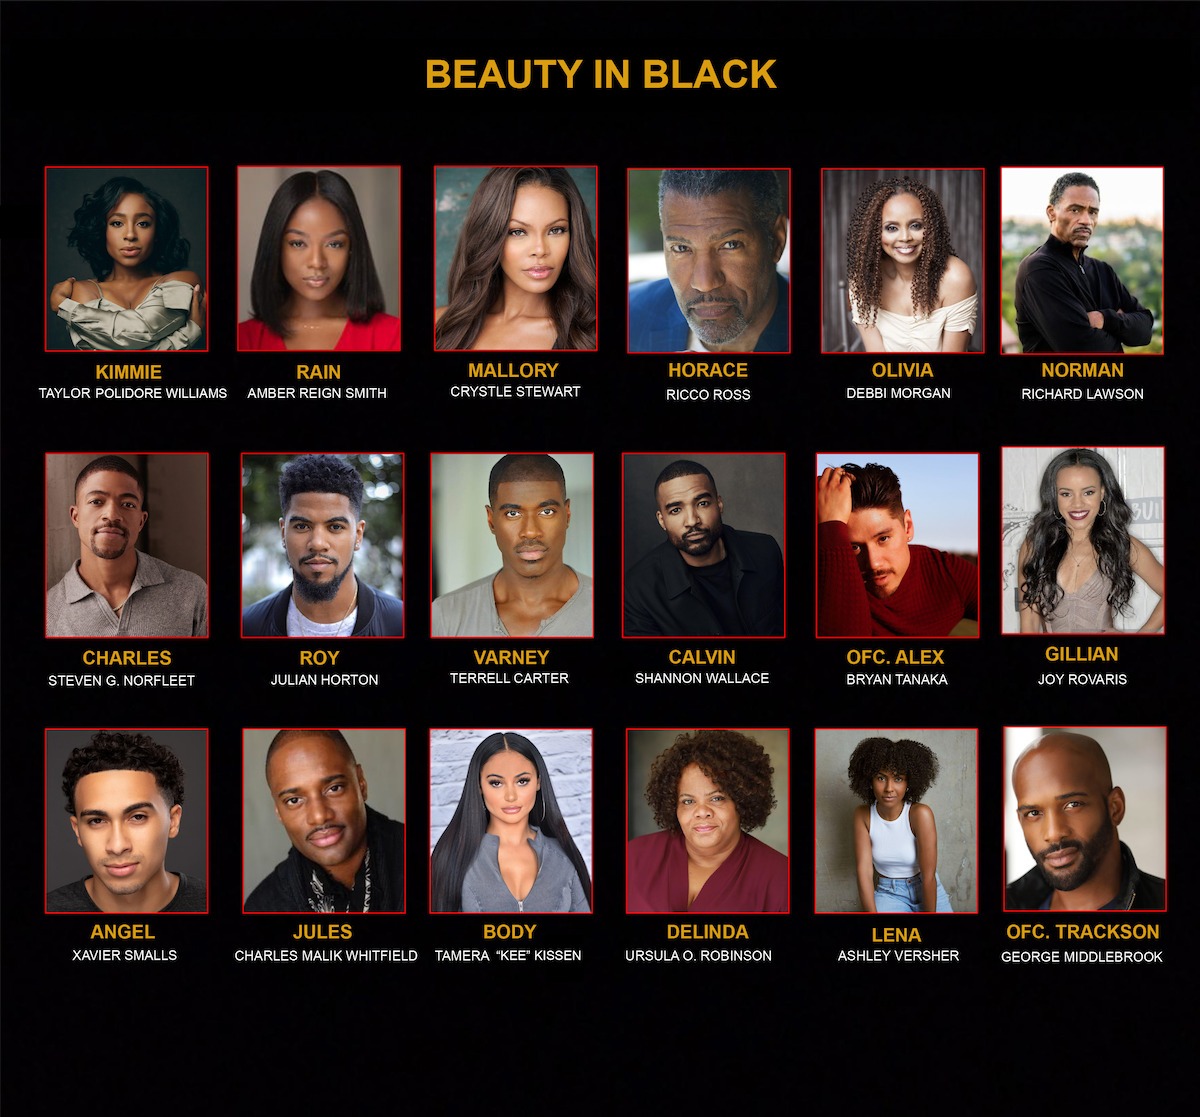 #Tyler Perry’s Beauty in Black: Netflix Reveals Casting for Perry’s New Drama Series